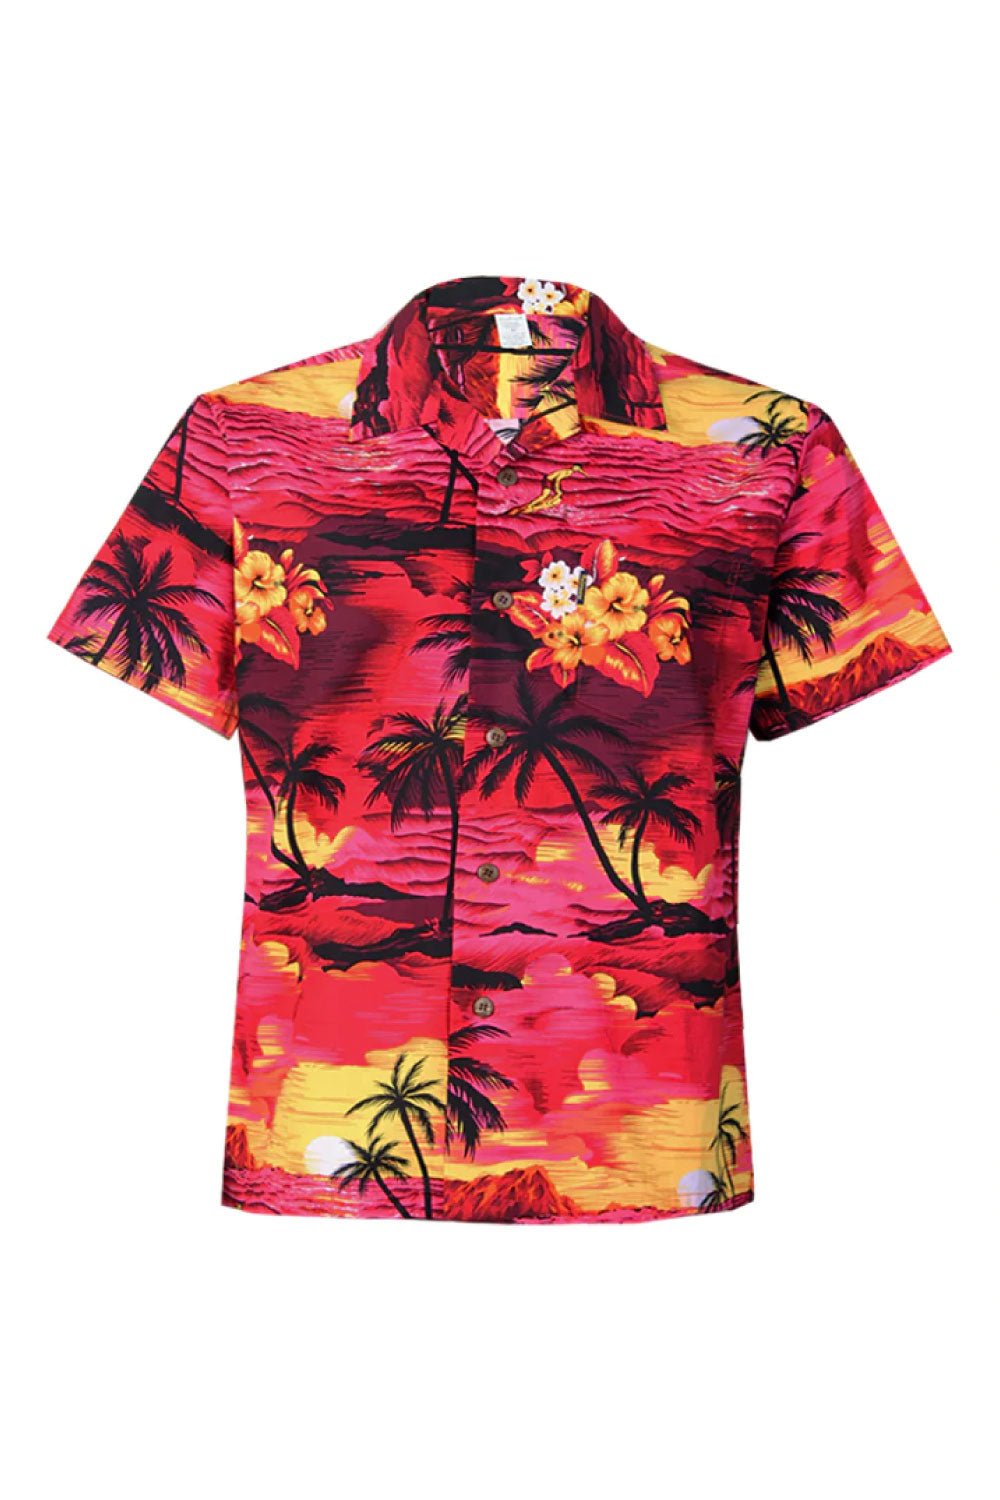 Image of the front of Palmwave's Red Scenery Aloha Men's Shirt.